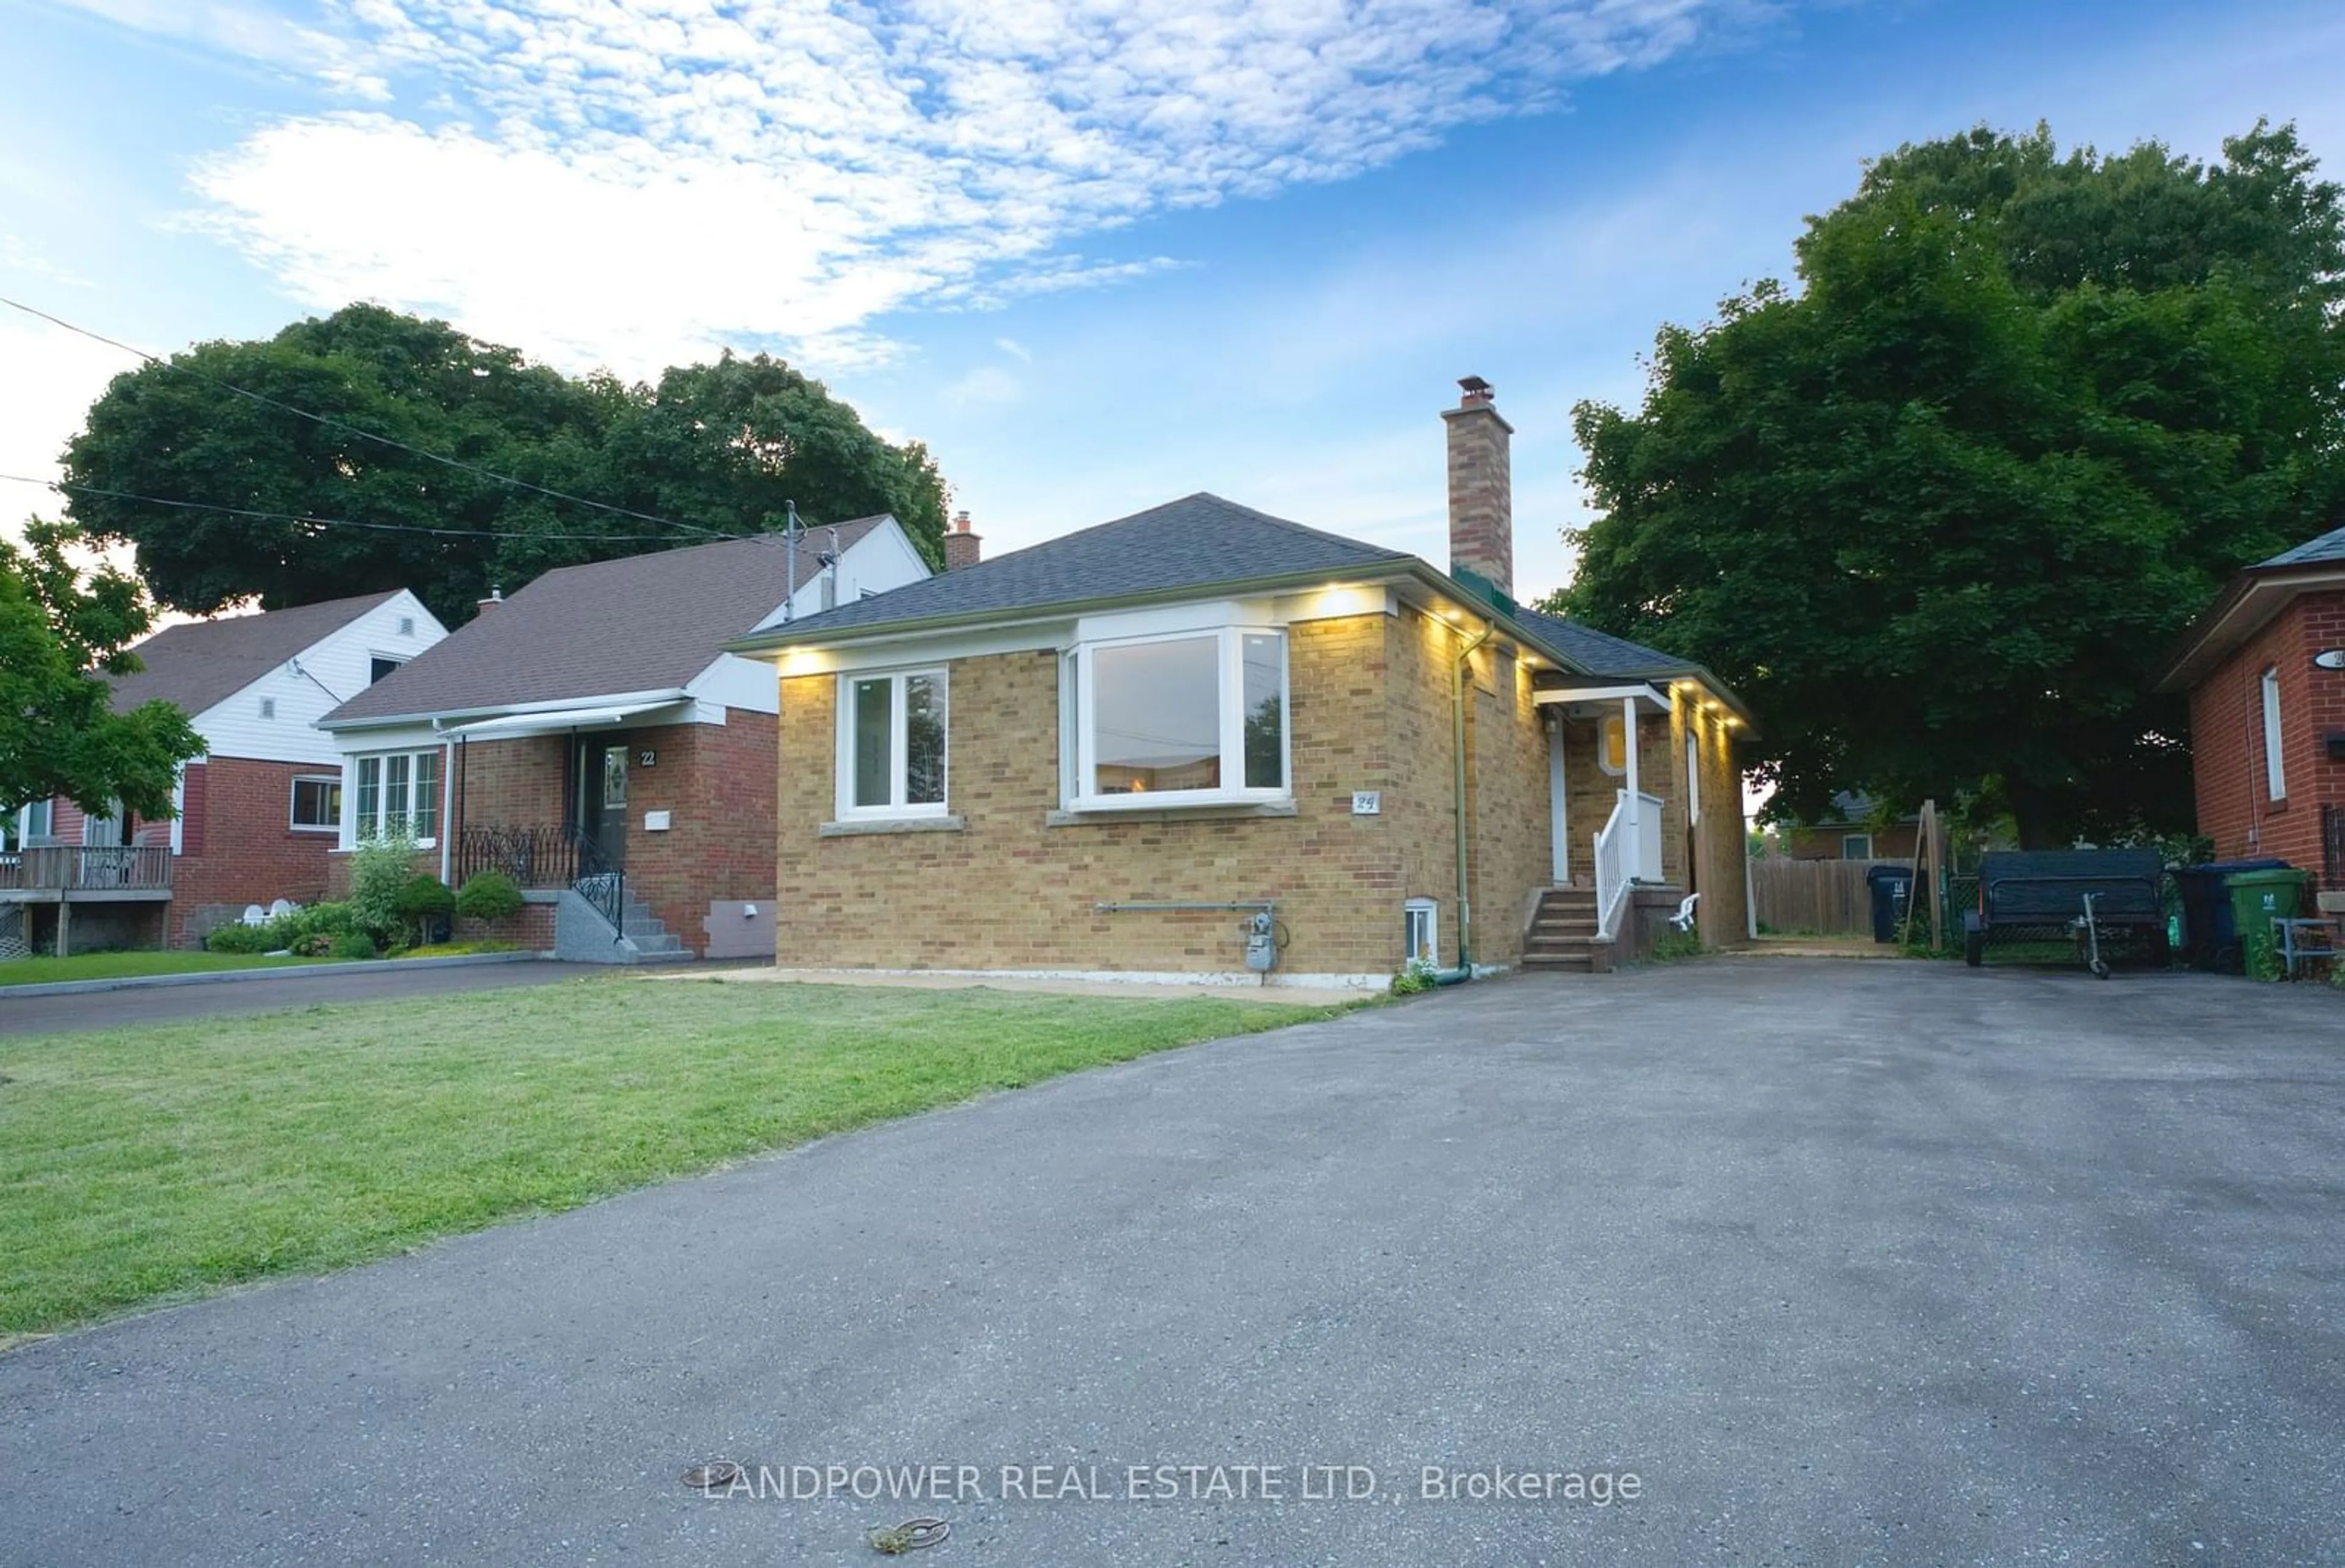 Frontside or backside of a home for 24 Dewey Dr, Toronto Ontario M1R 3K4